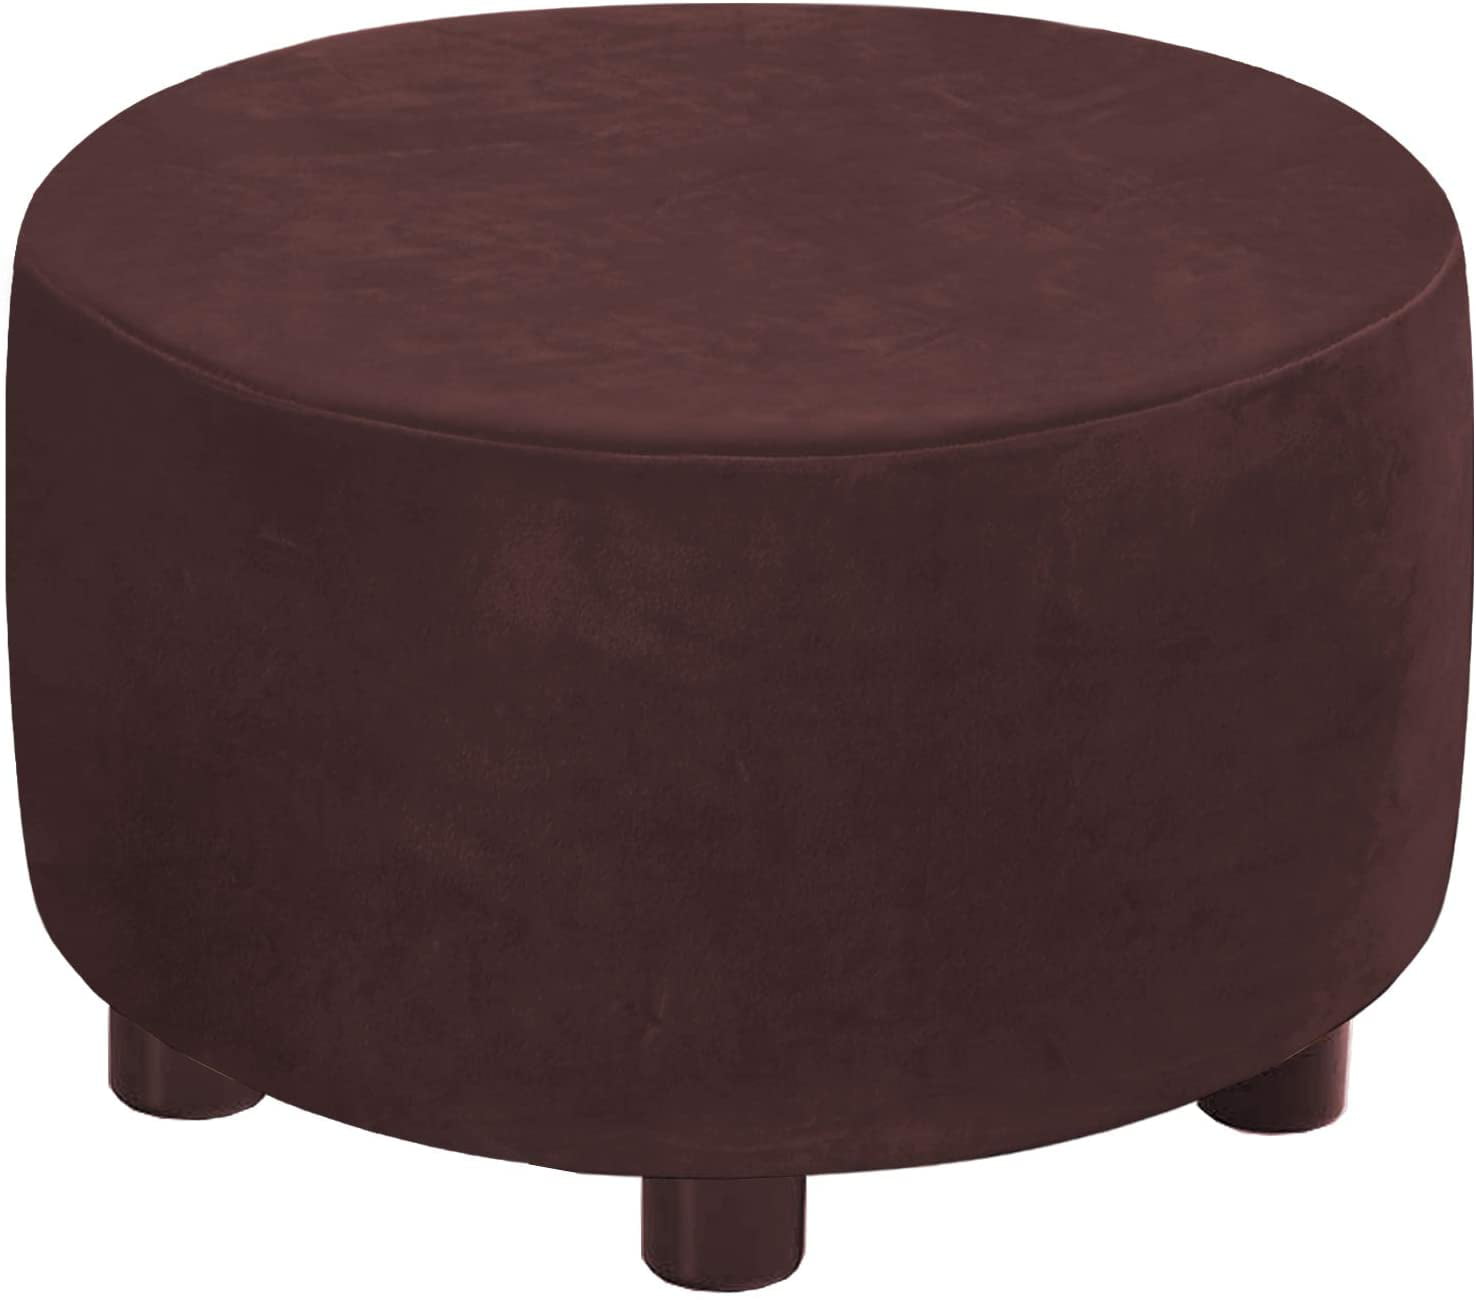 Details about   Elastic Ottoman Pouf Cover Foot Rest Stool Slipcover for Dressing Room 